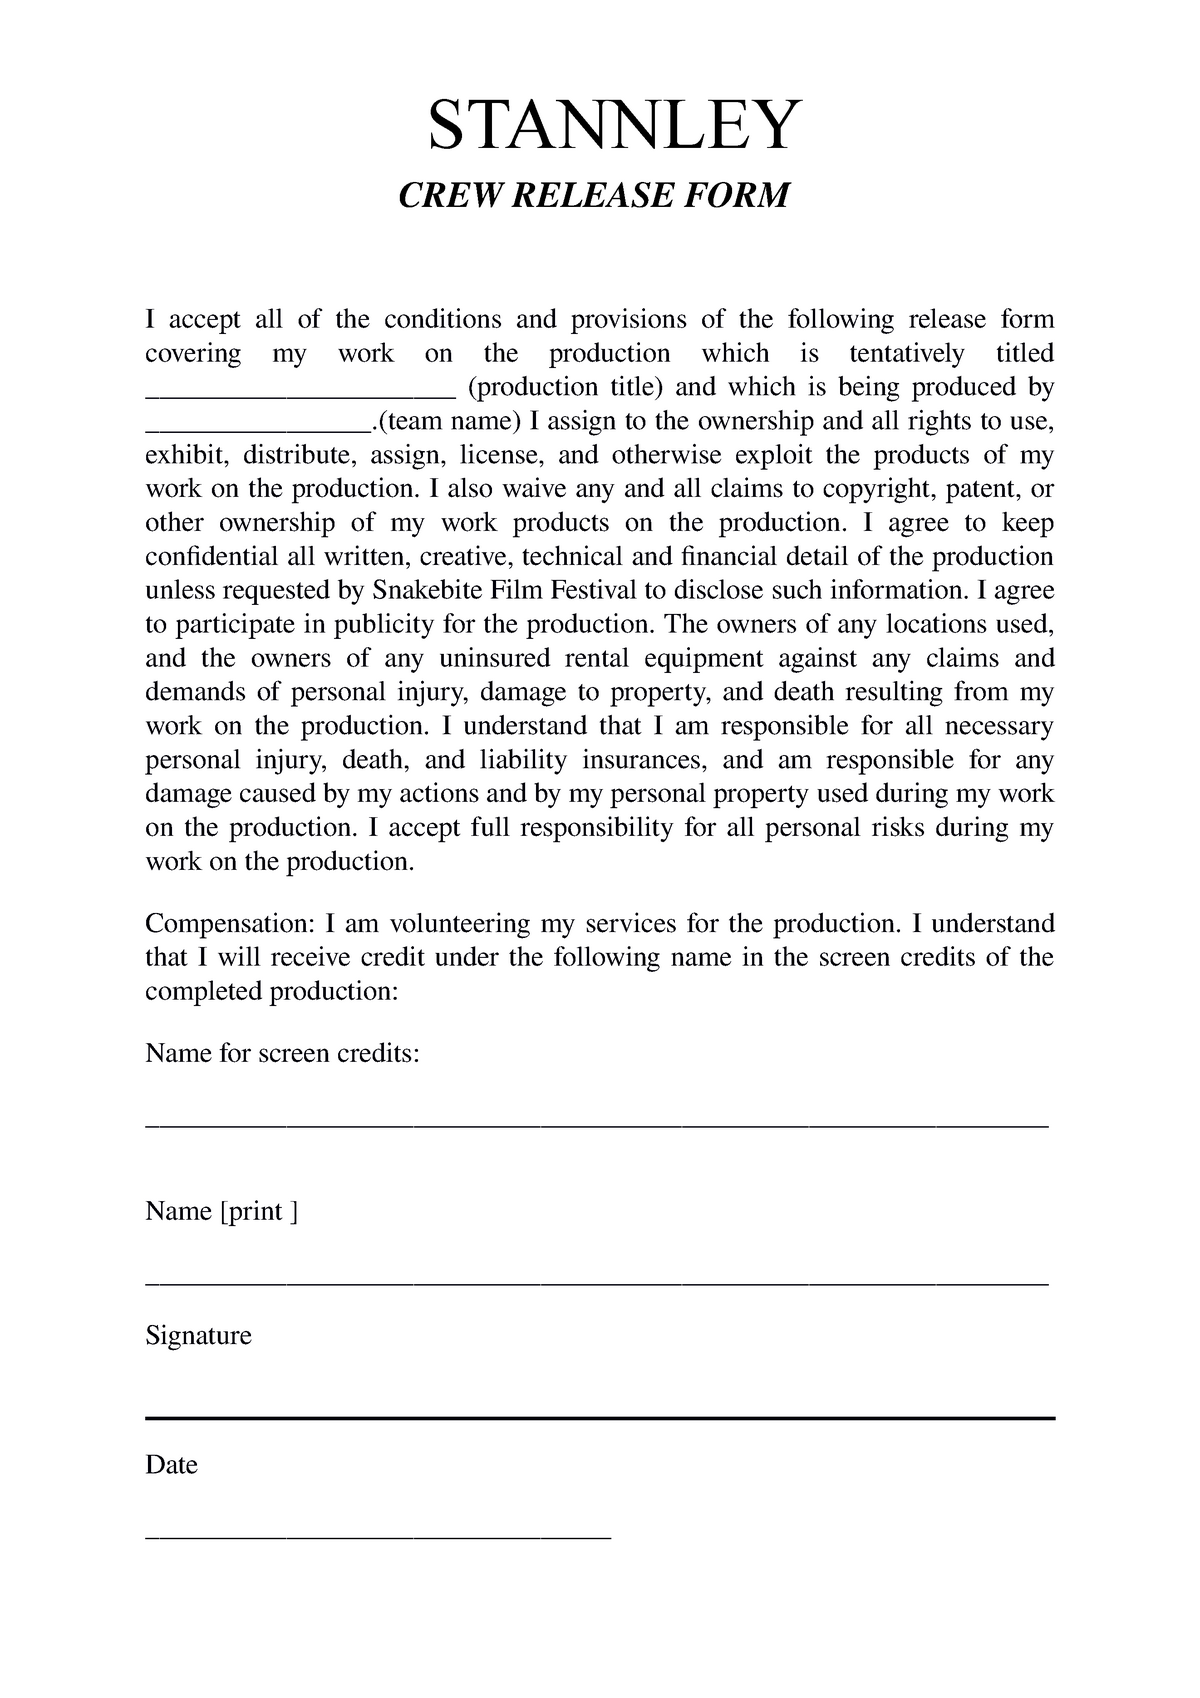 Crew Release Form Template CREW RELEASE FORM I Accept All Of The 